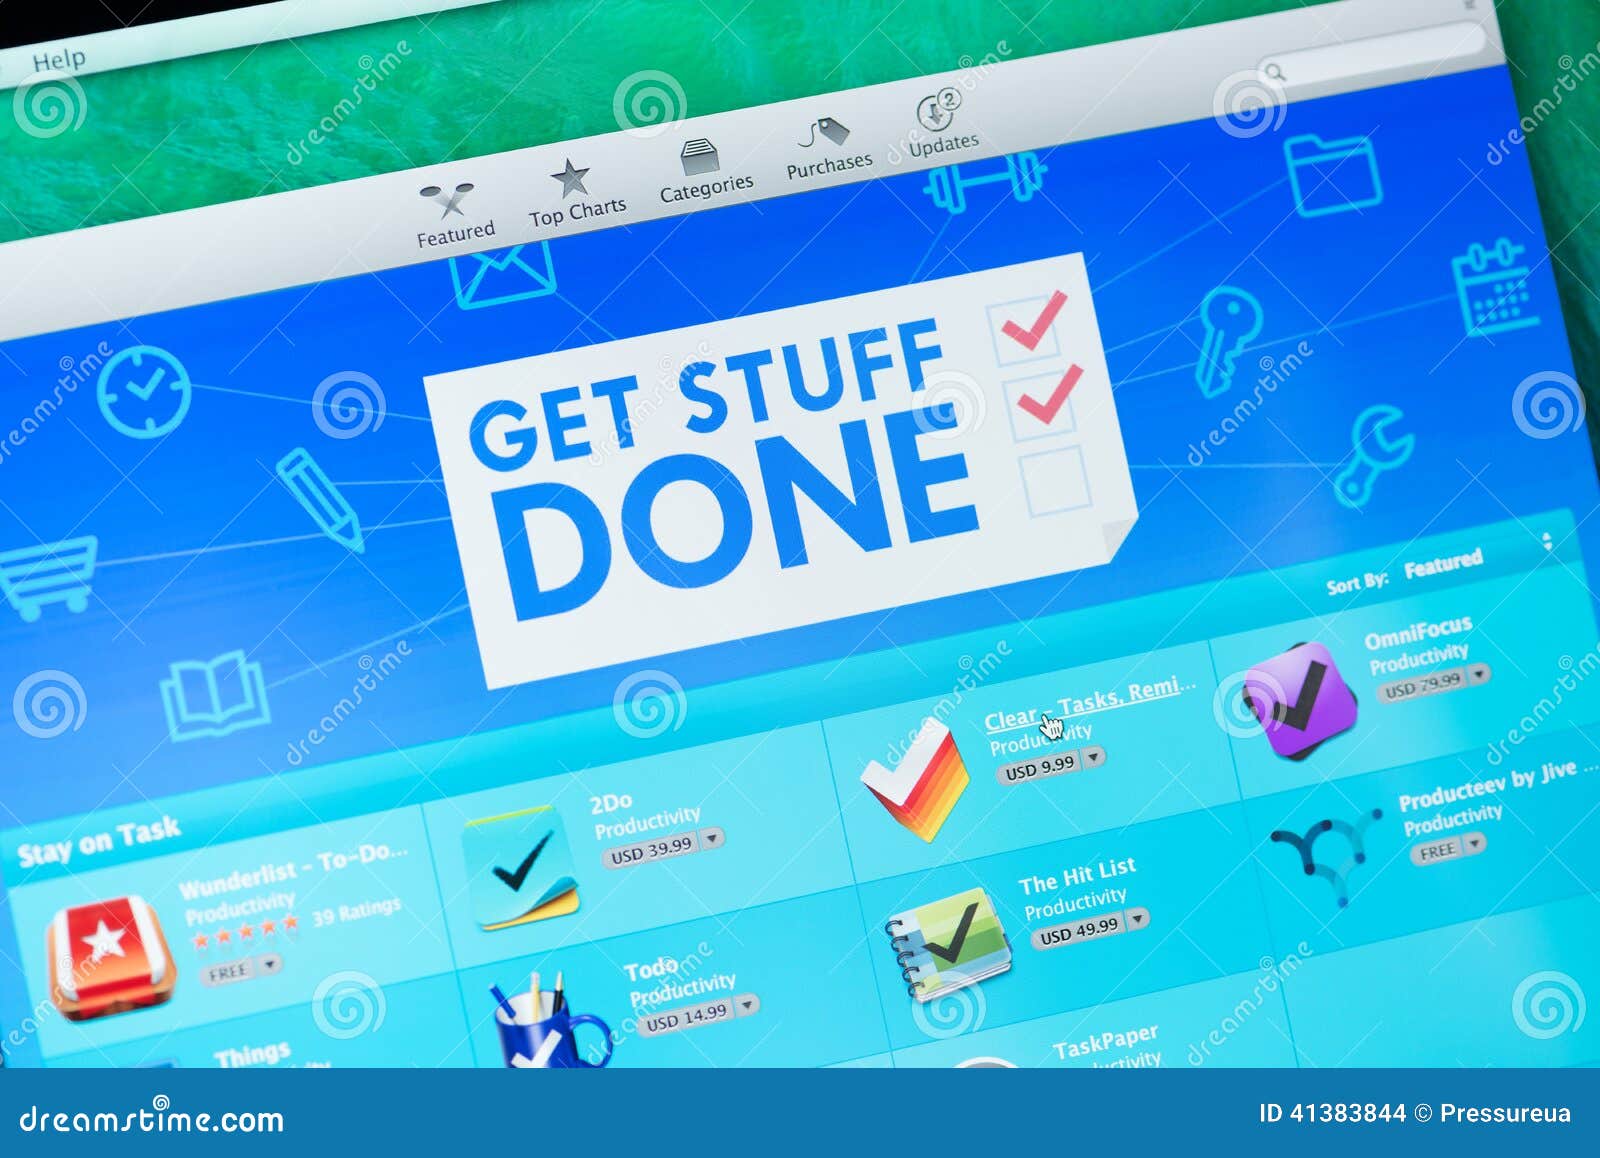 best app for getting things done